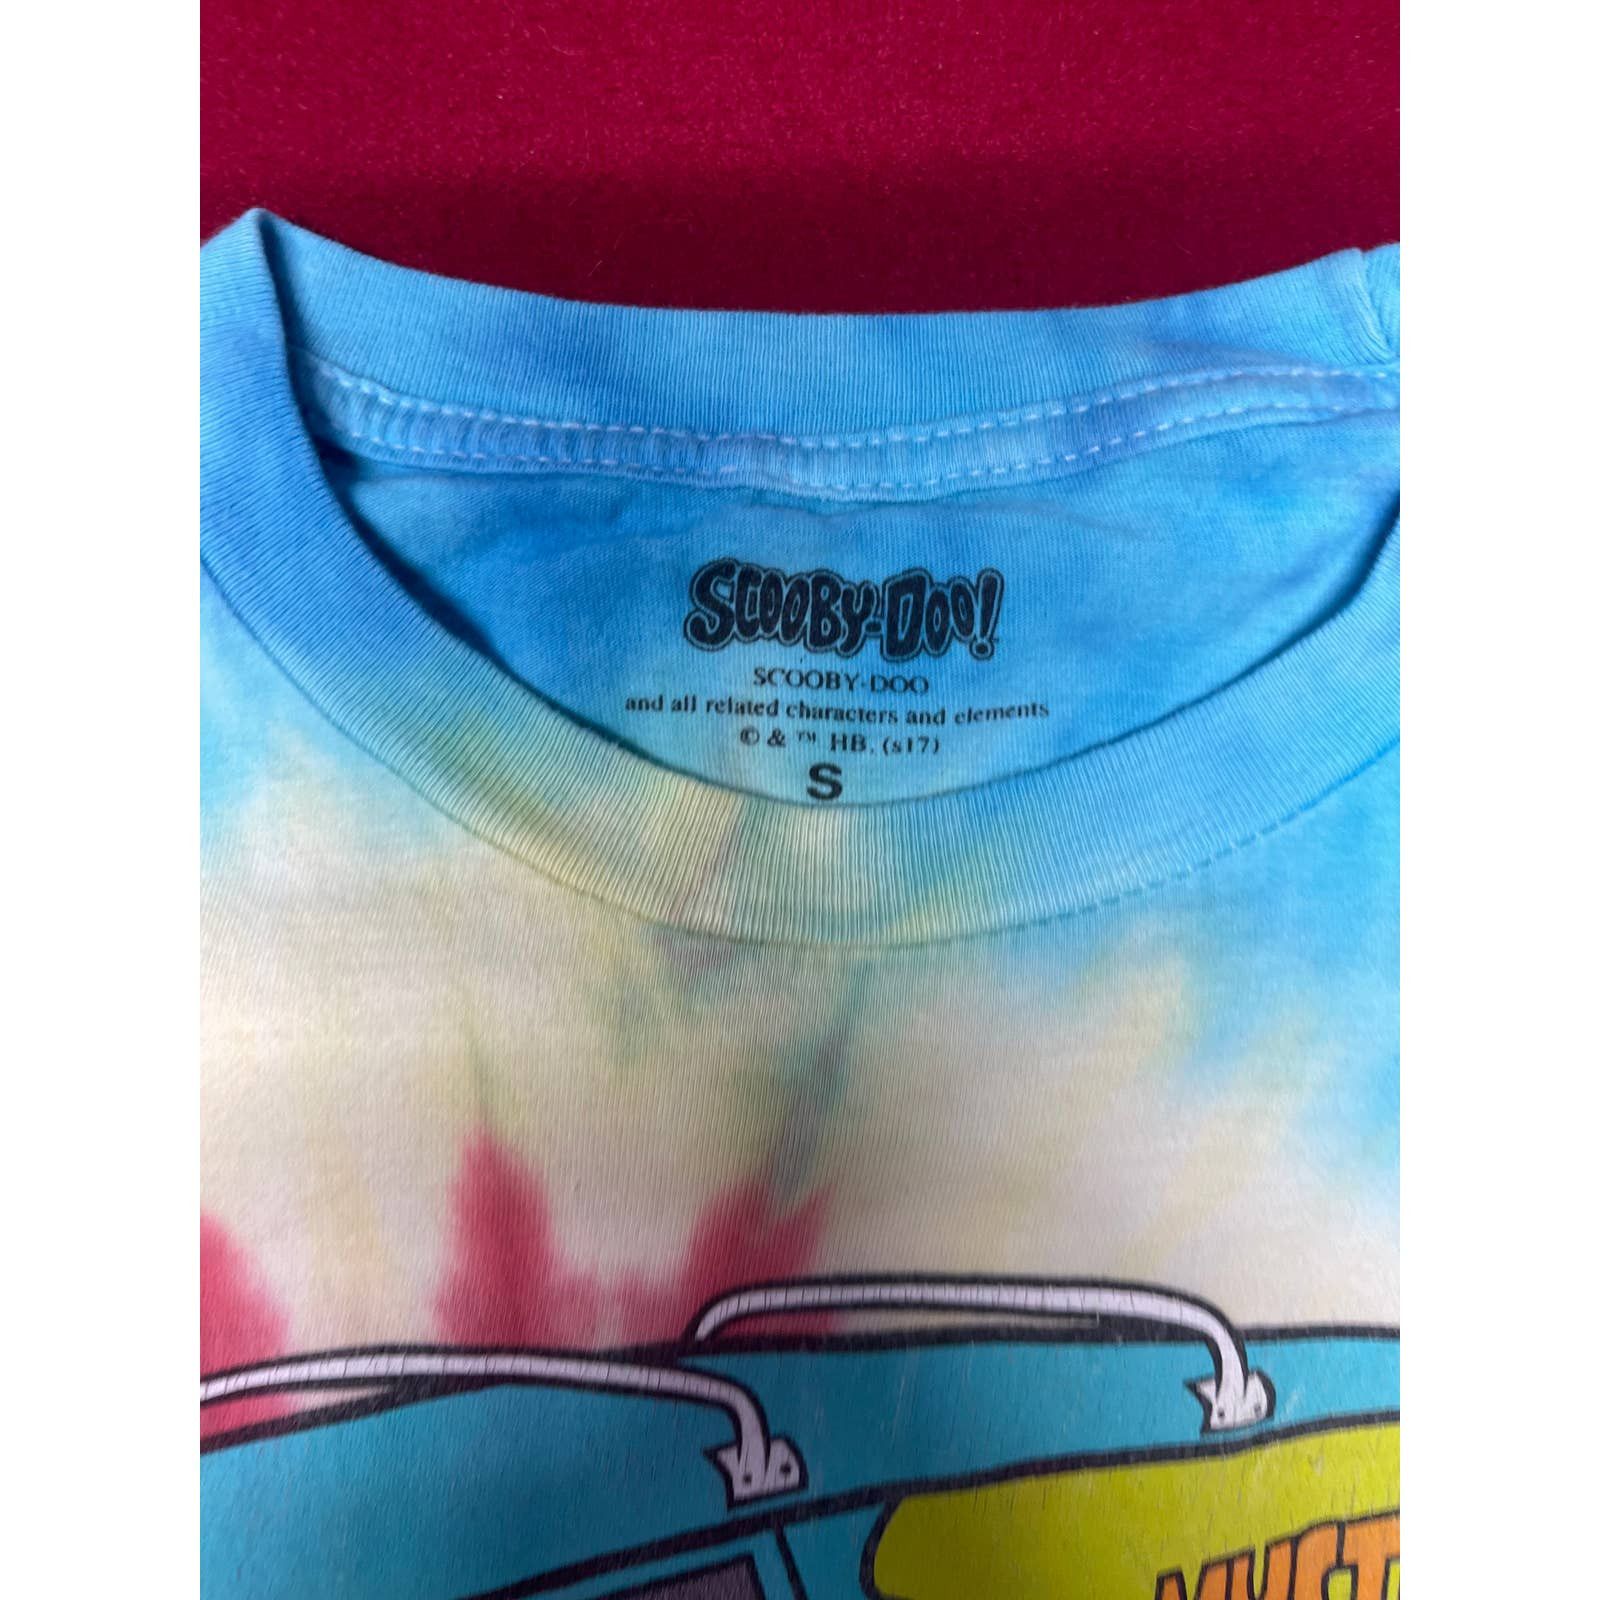 1 Scooby Doo Tie Dyed T shirt size s, mystery machine, ghost Size US S / EU 44-46 / 1 - 3 Thumbnail